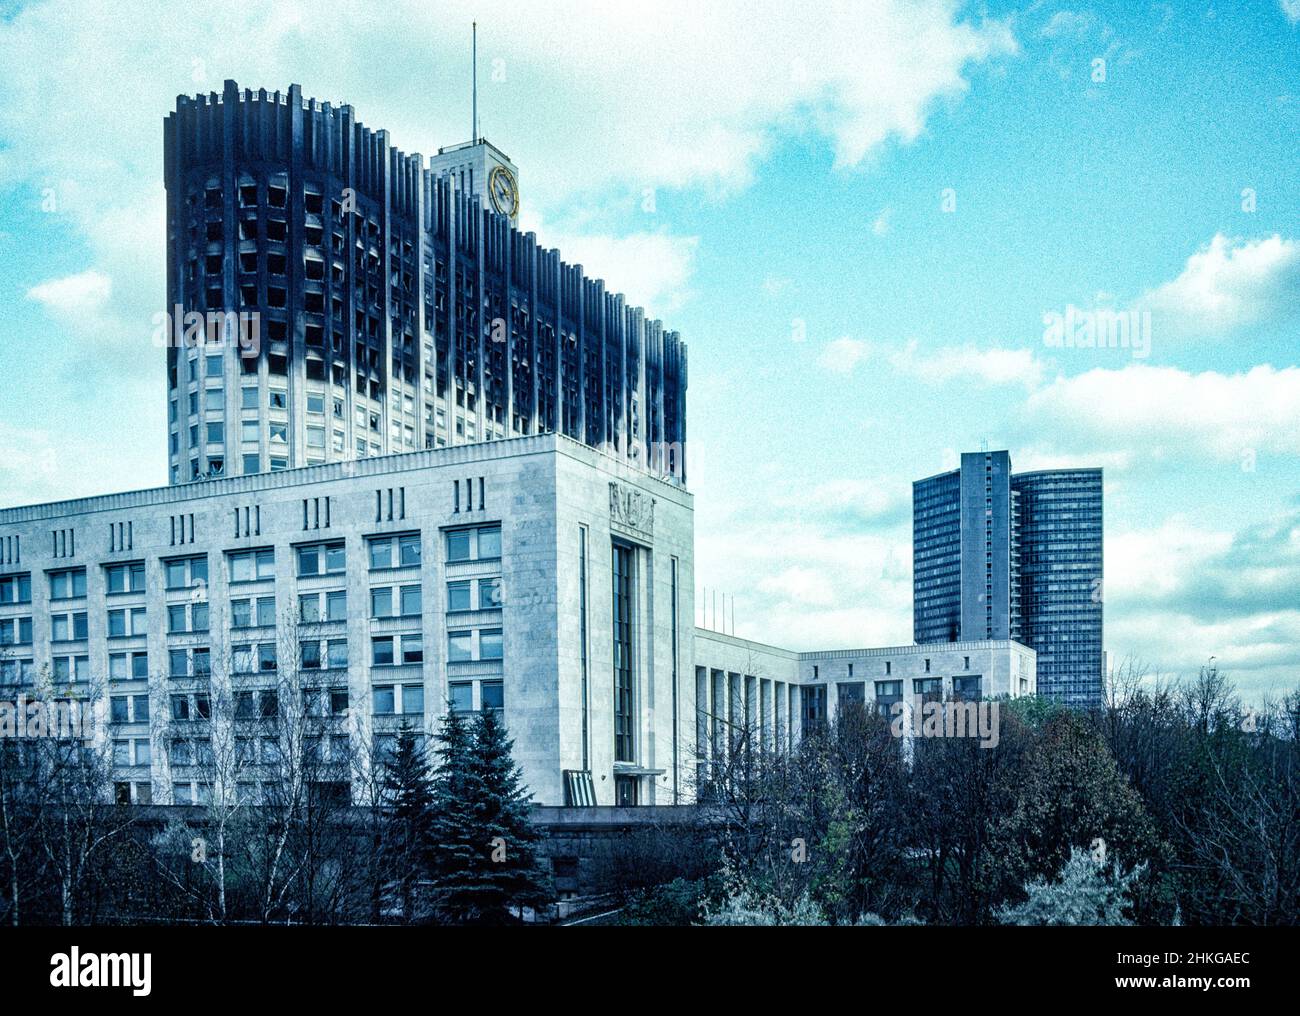 1993: The House of the Government of the Russian Federation, damaged after shelling during the 1993 Russian constitutional crisis. Stock Photo